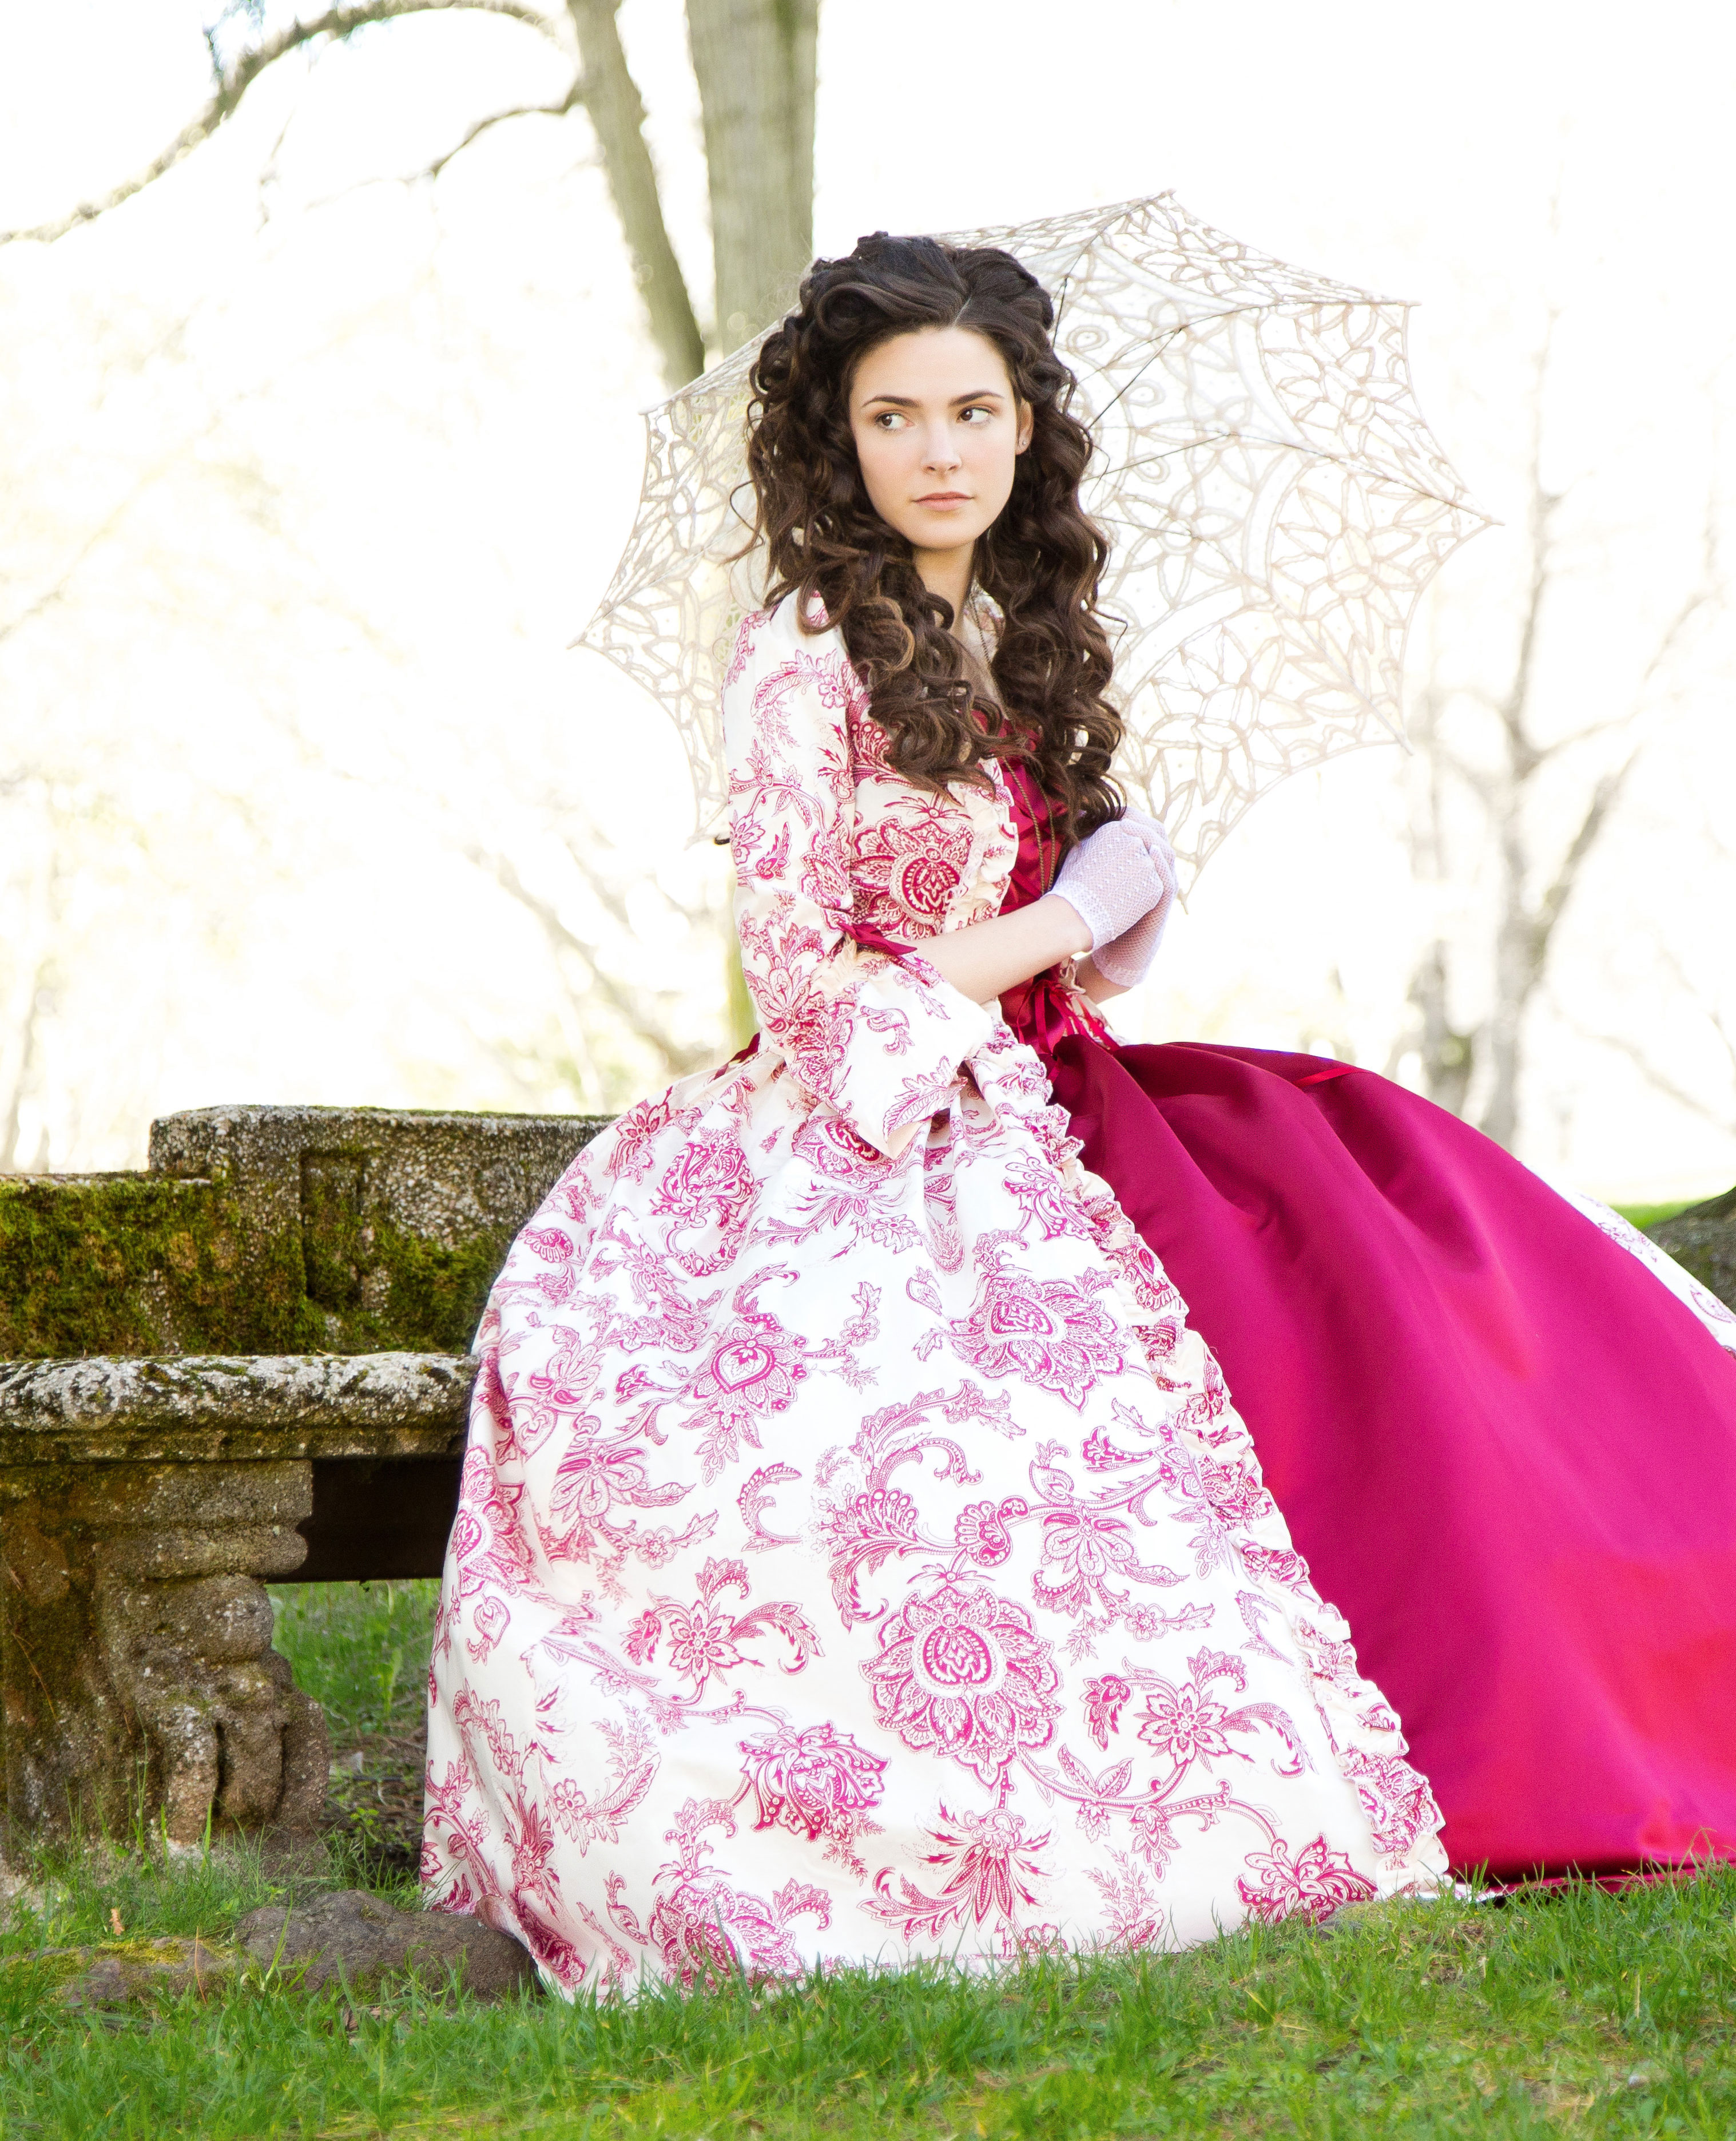 Women clothing for victorian era Victorian Clothes,